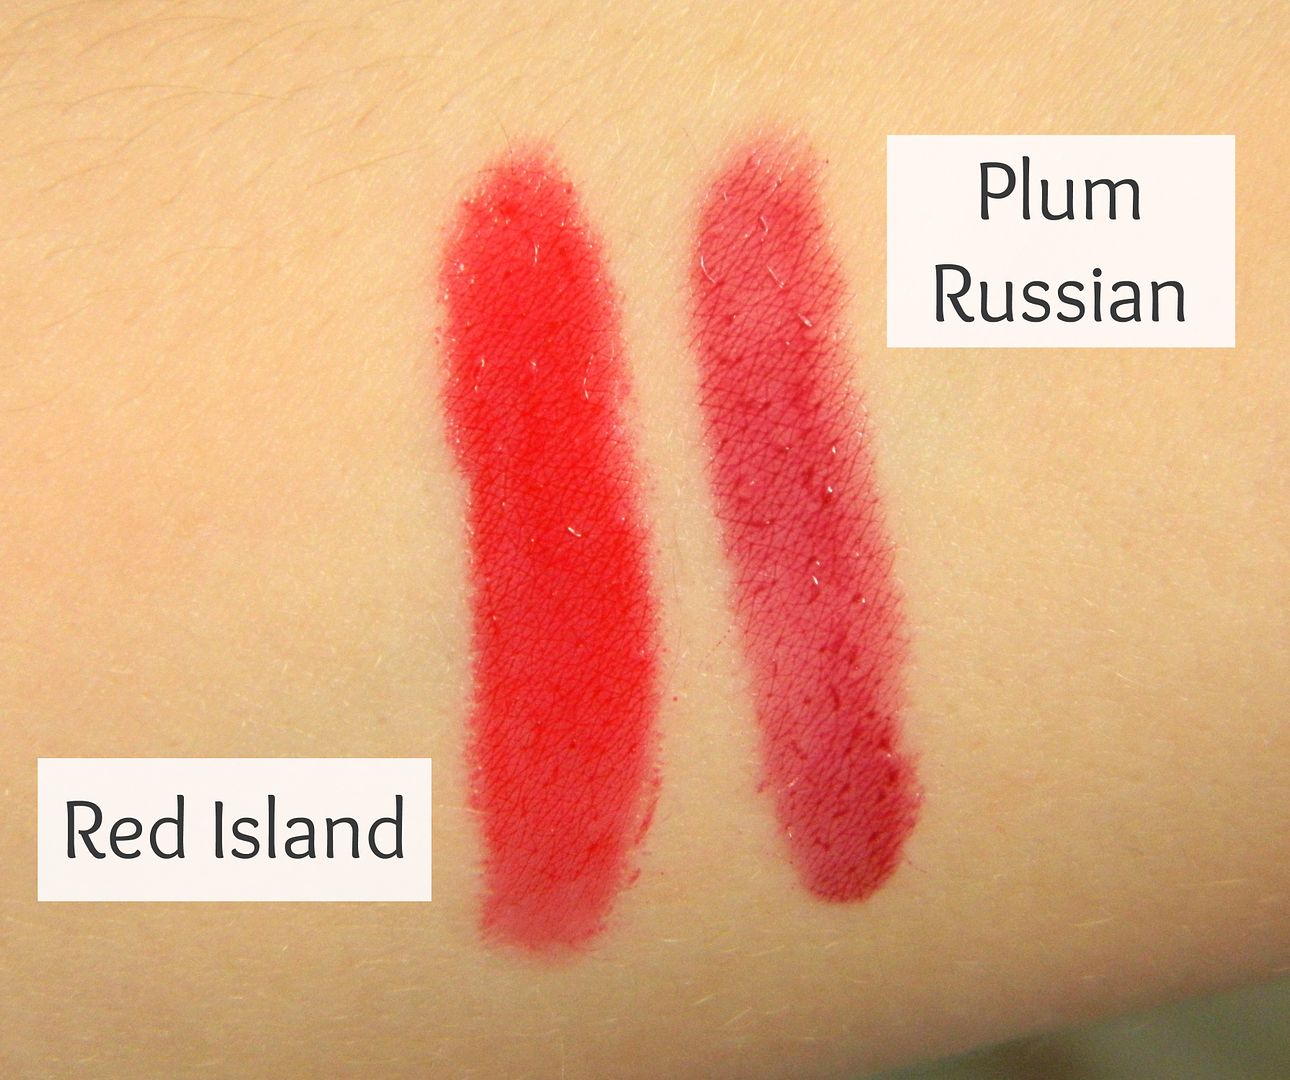 Bourjois Color Boost Lip Crayons Autumn Edition Red Island Plum Russian Review Swatches Belle-amie UK Beauty Fashion Lifestyle Blog